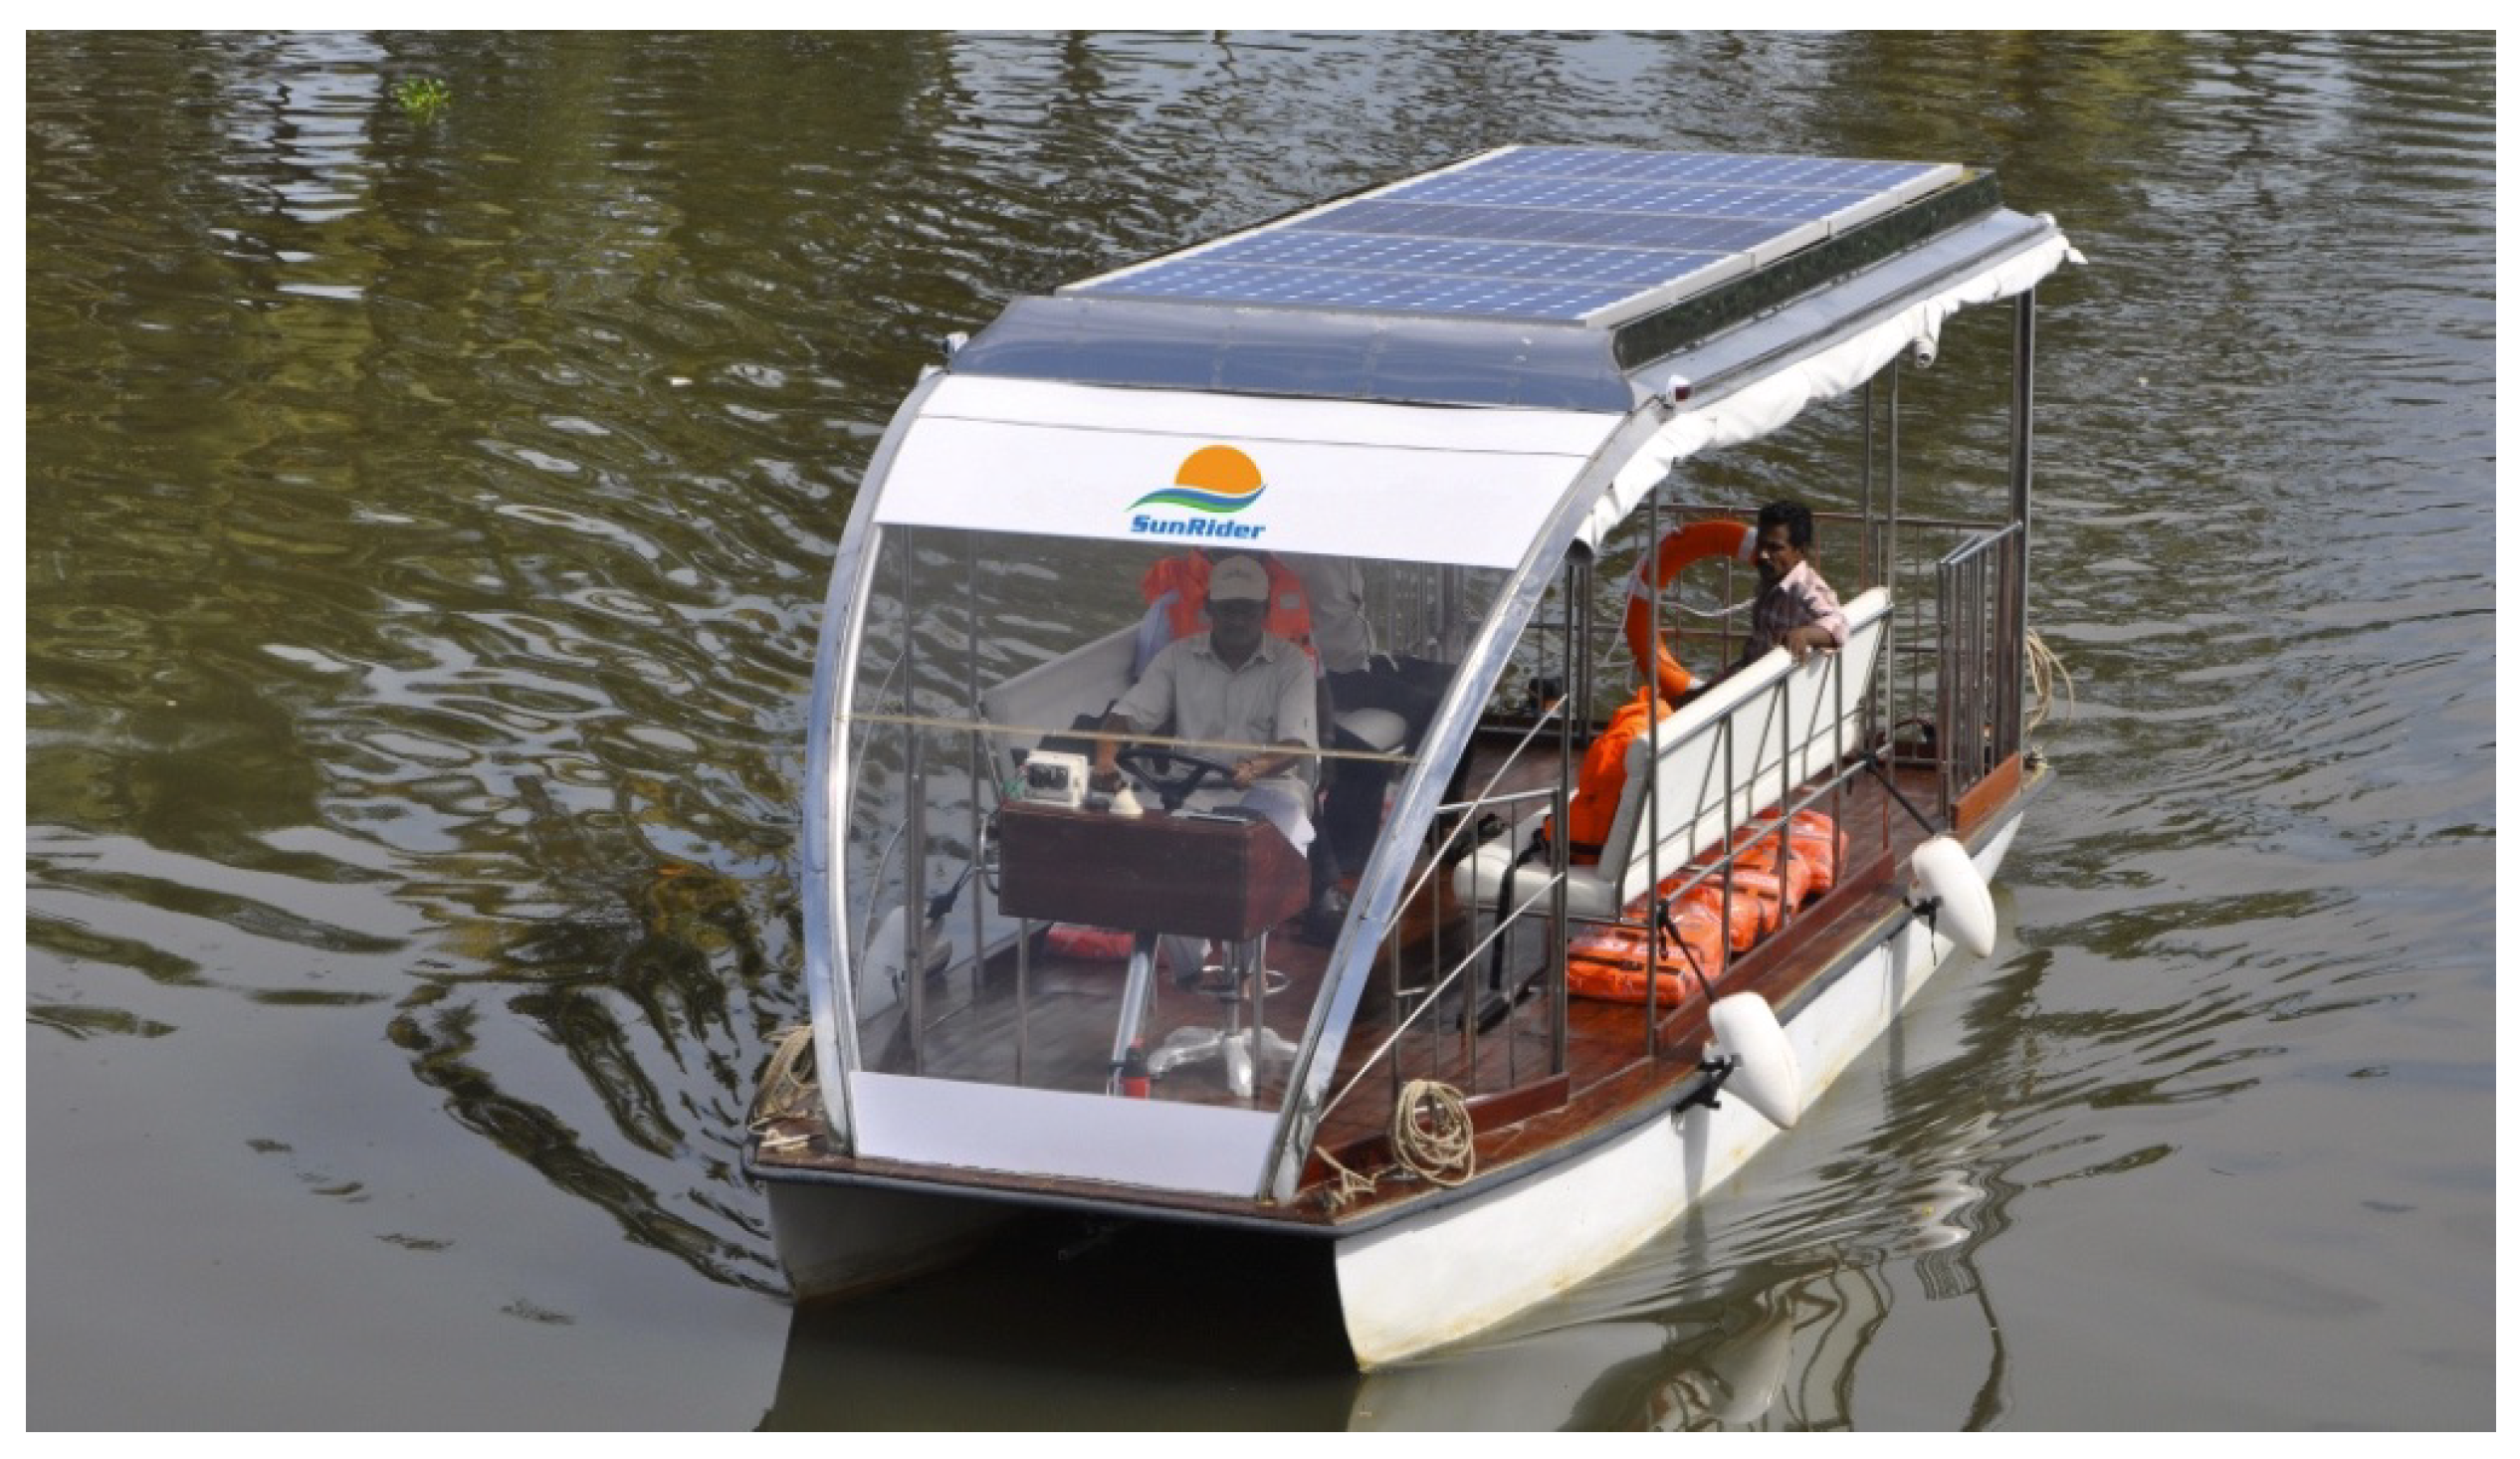 The Growing Trend of Solar-Powered Electric Boats